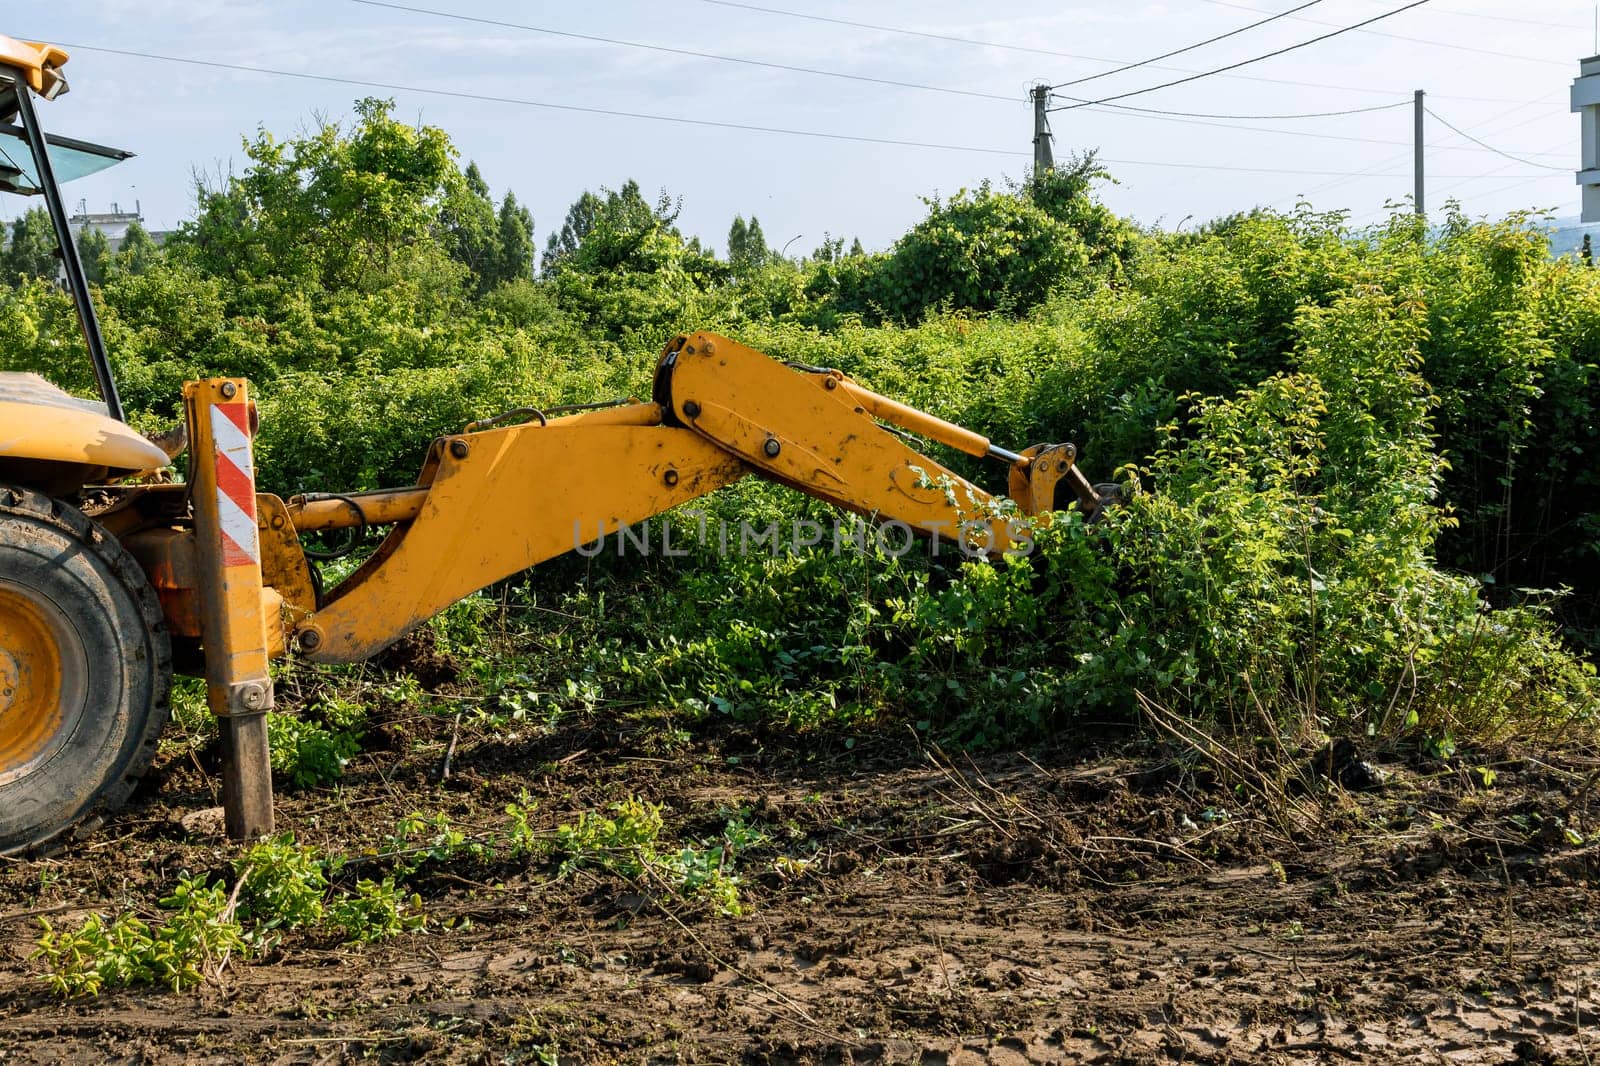 Land clearing with an excavator involves systematic removal of vegetation with help of its specialized equipment.